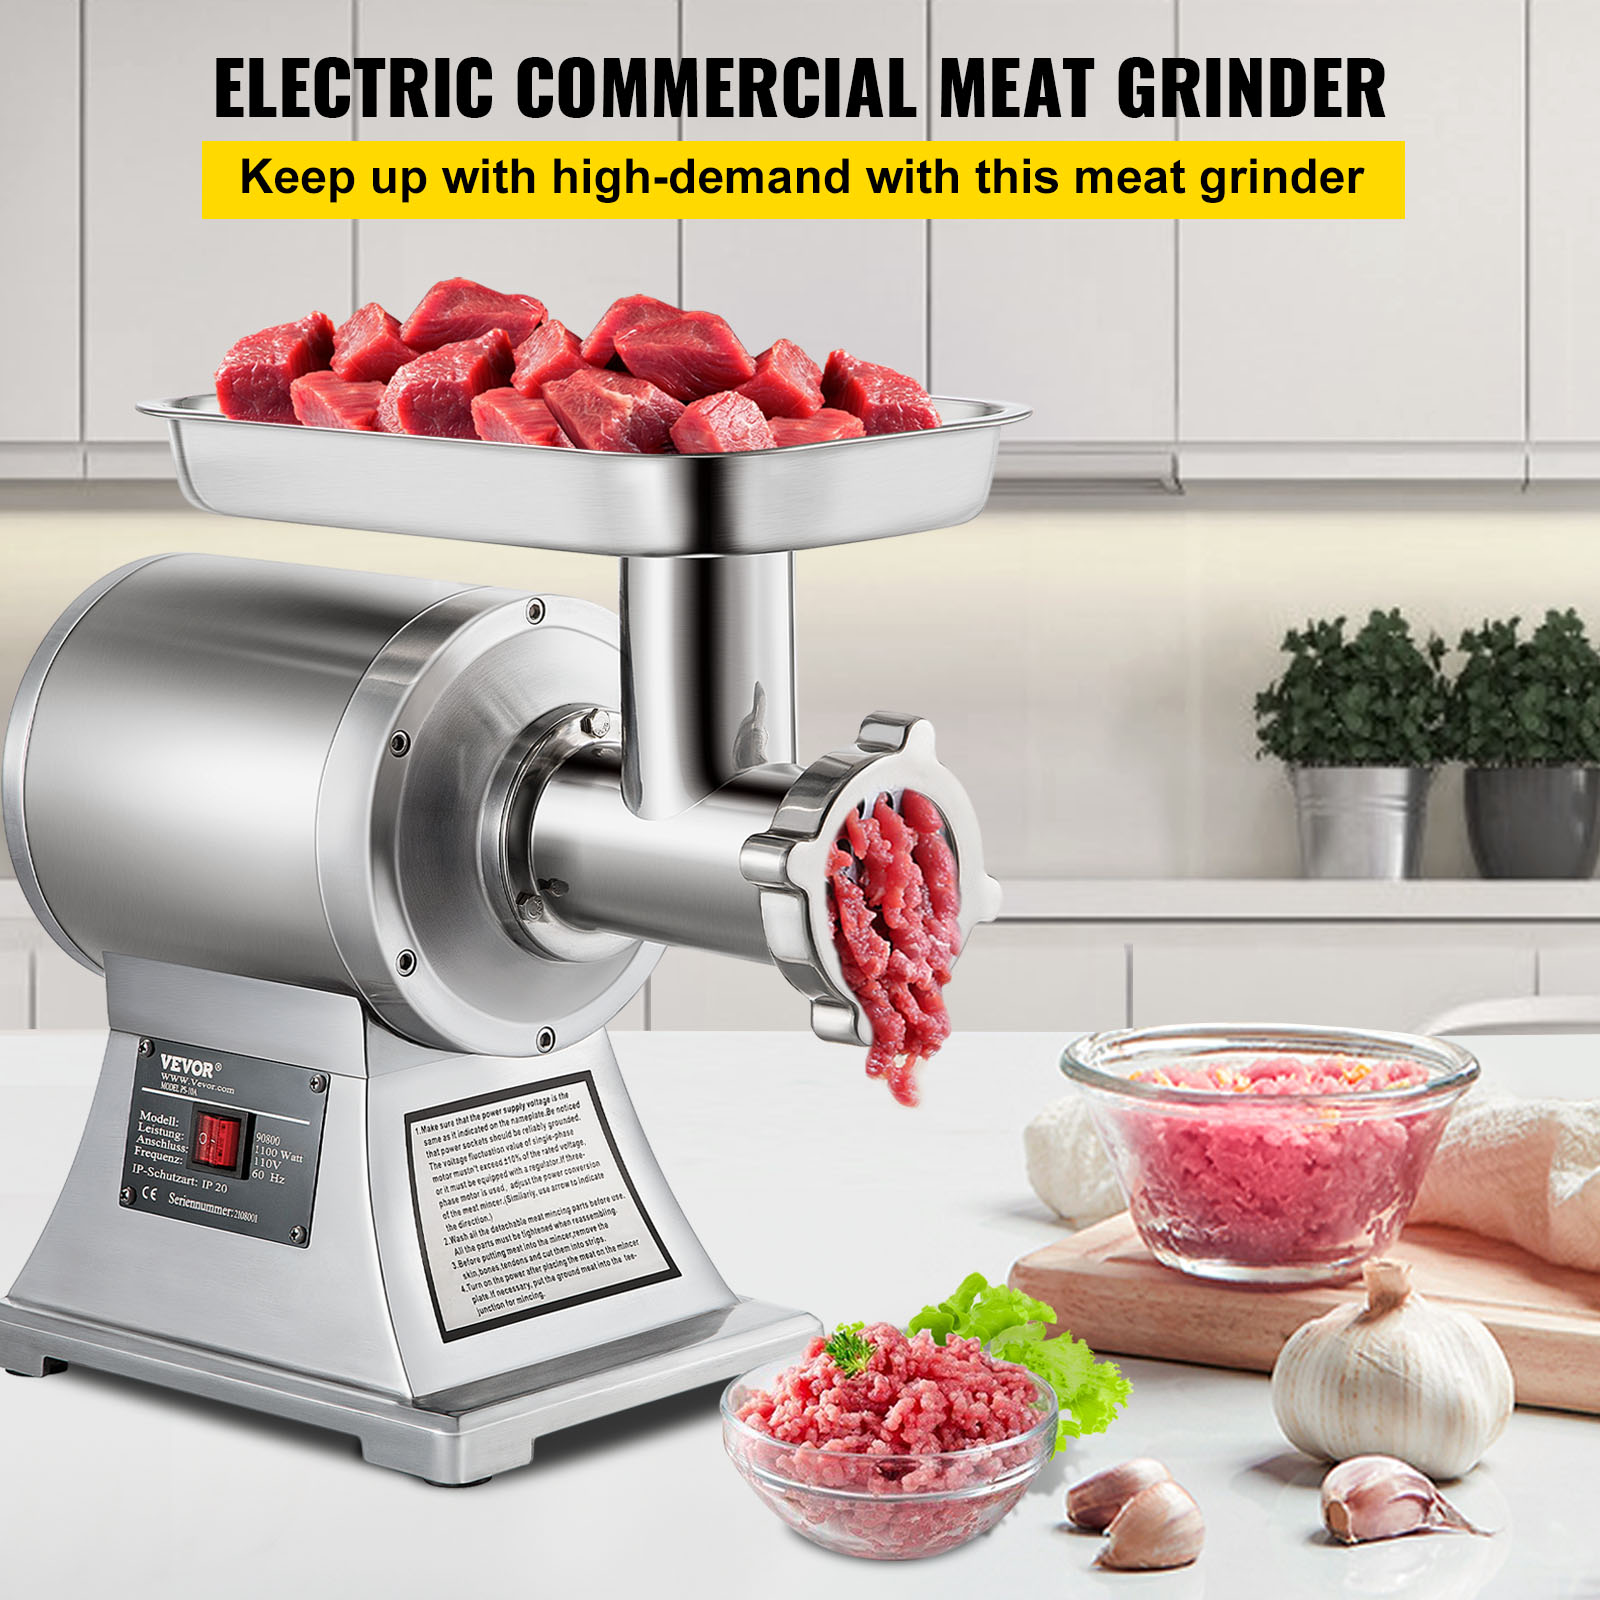 27L Electric Meat Mixer For Restaurant ,Hotel and school